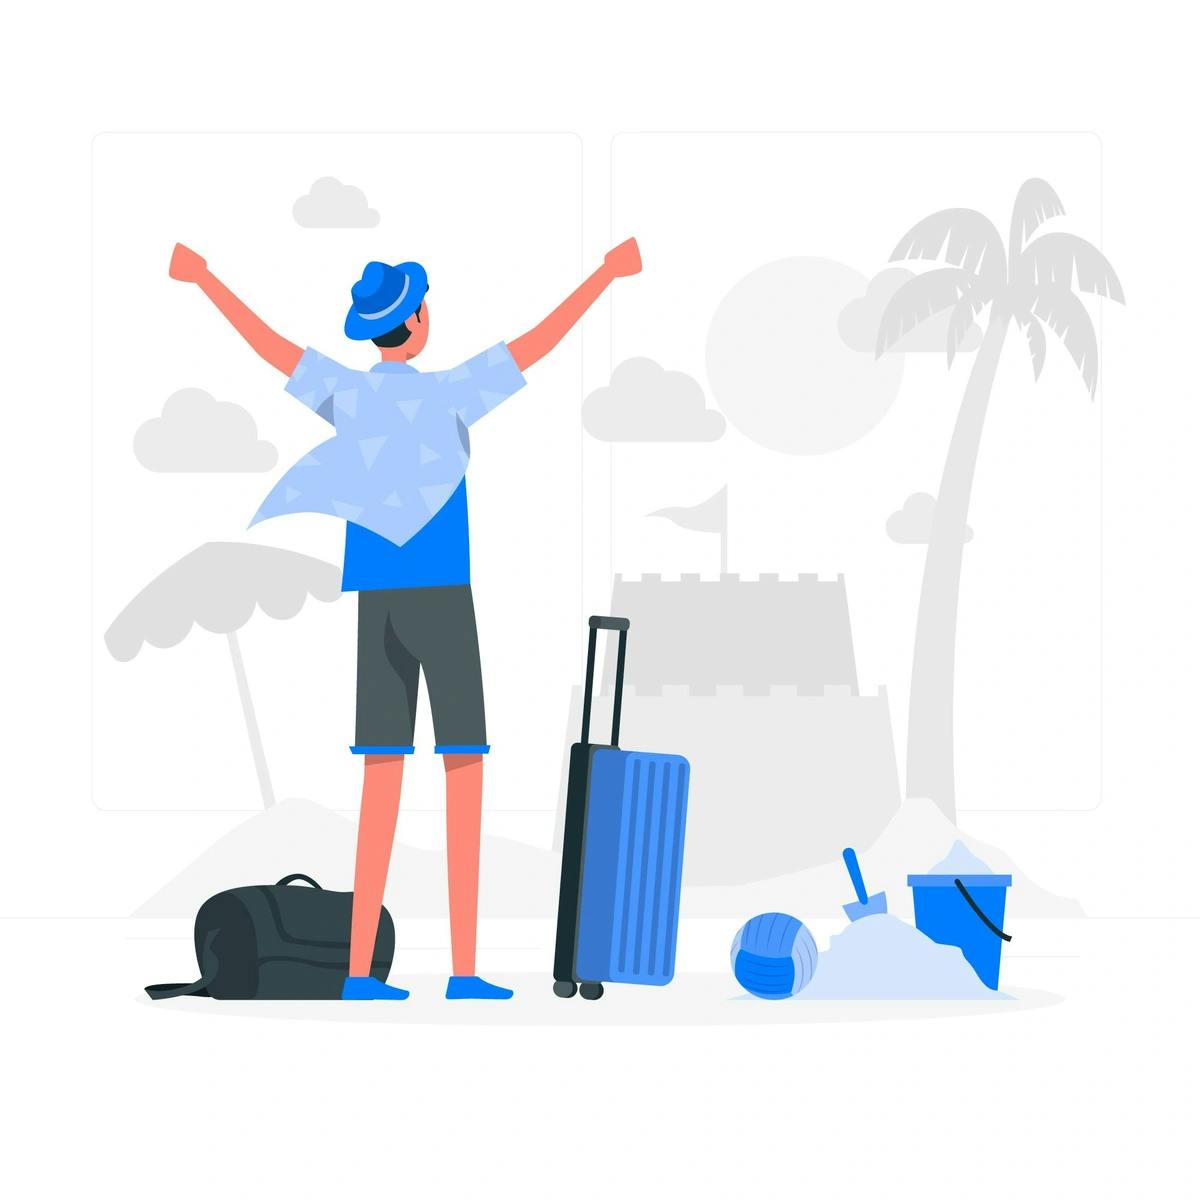 An image of a person with luggage at a beach setting, celebrating travel, vacation, or the concept of a journey, possibly symbolizing freedom or success.